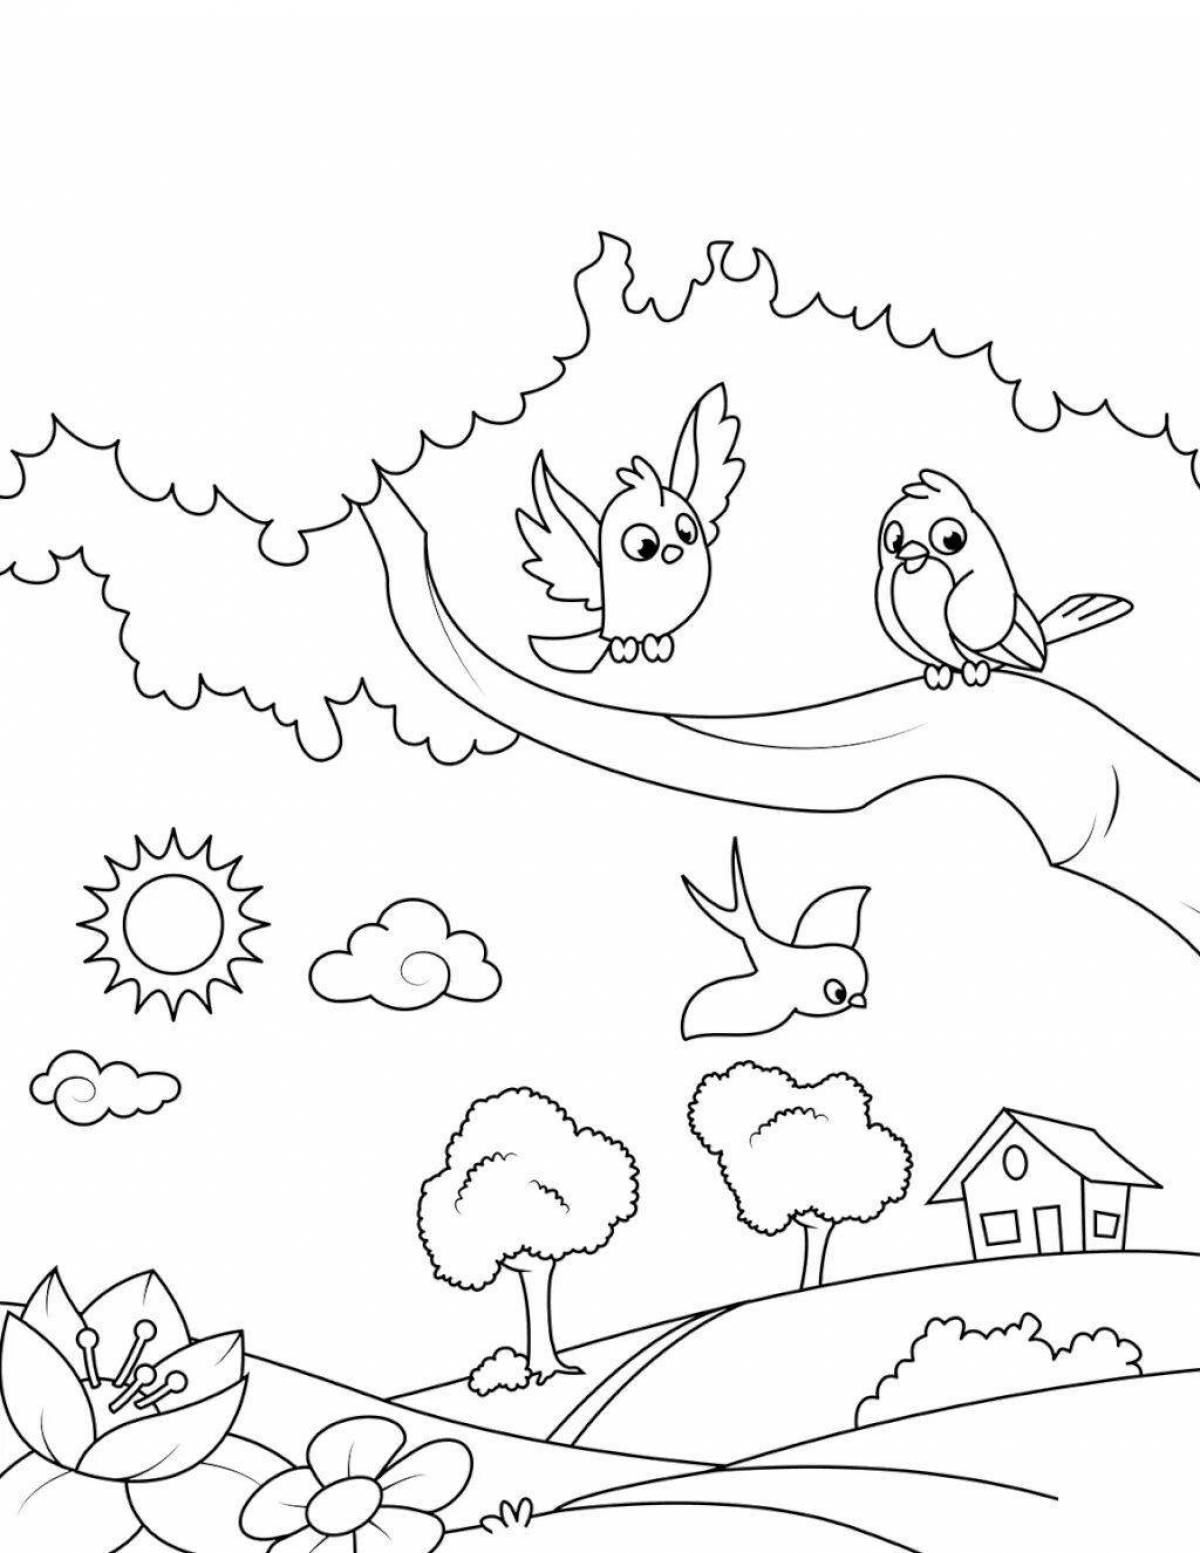 Amazing nature coloring book for 6-7 year olds